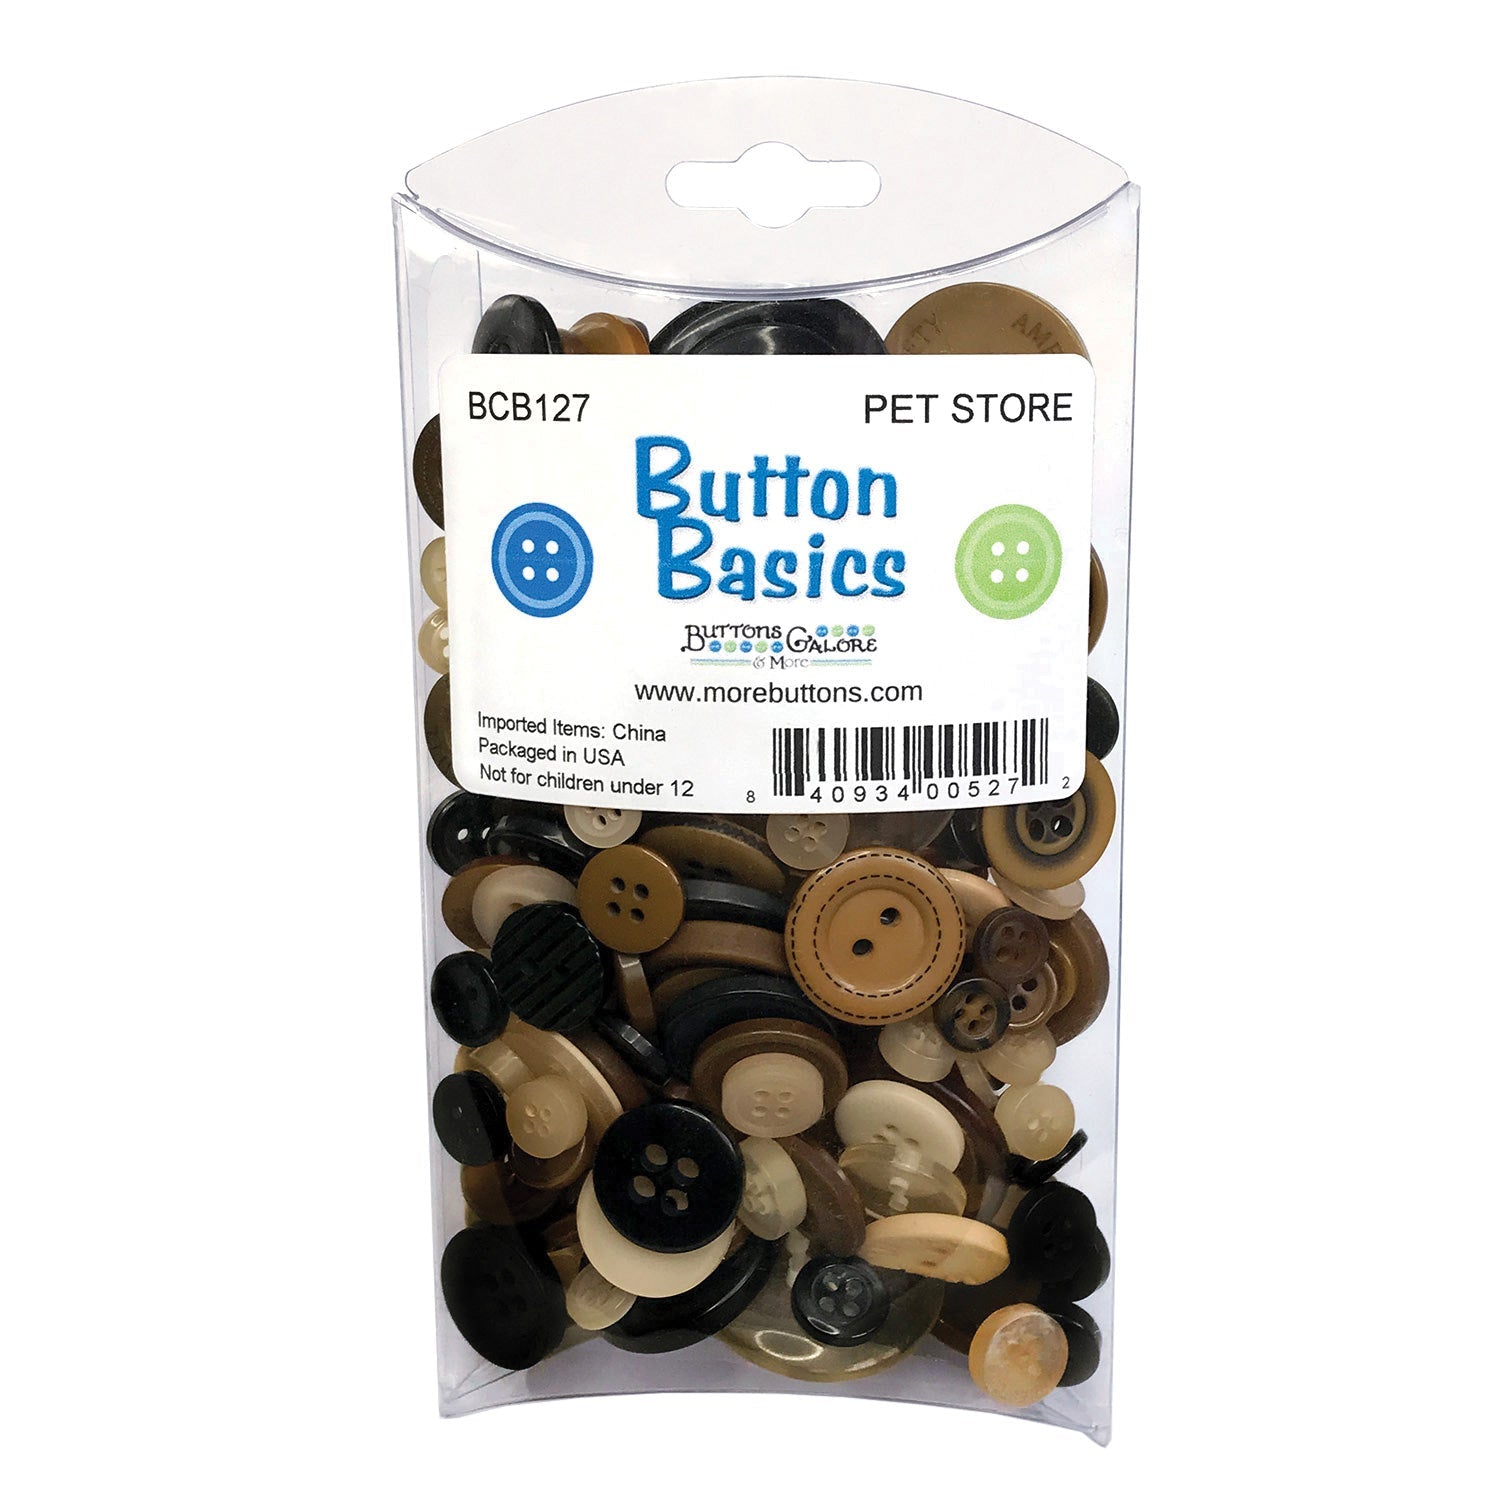 Pet Store - Buttons Galore and More